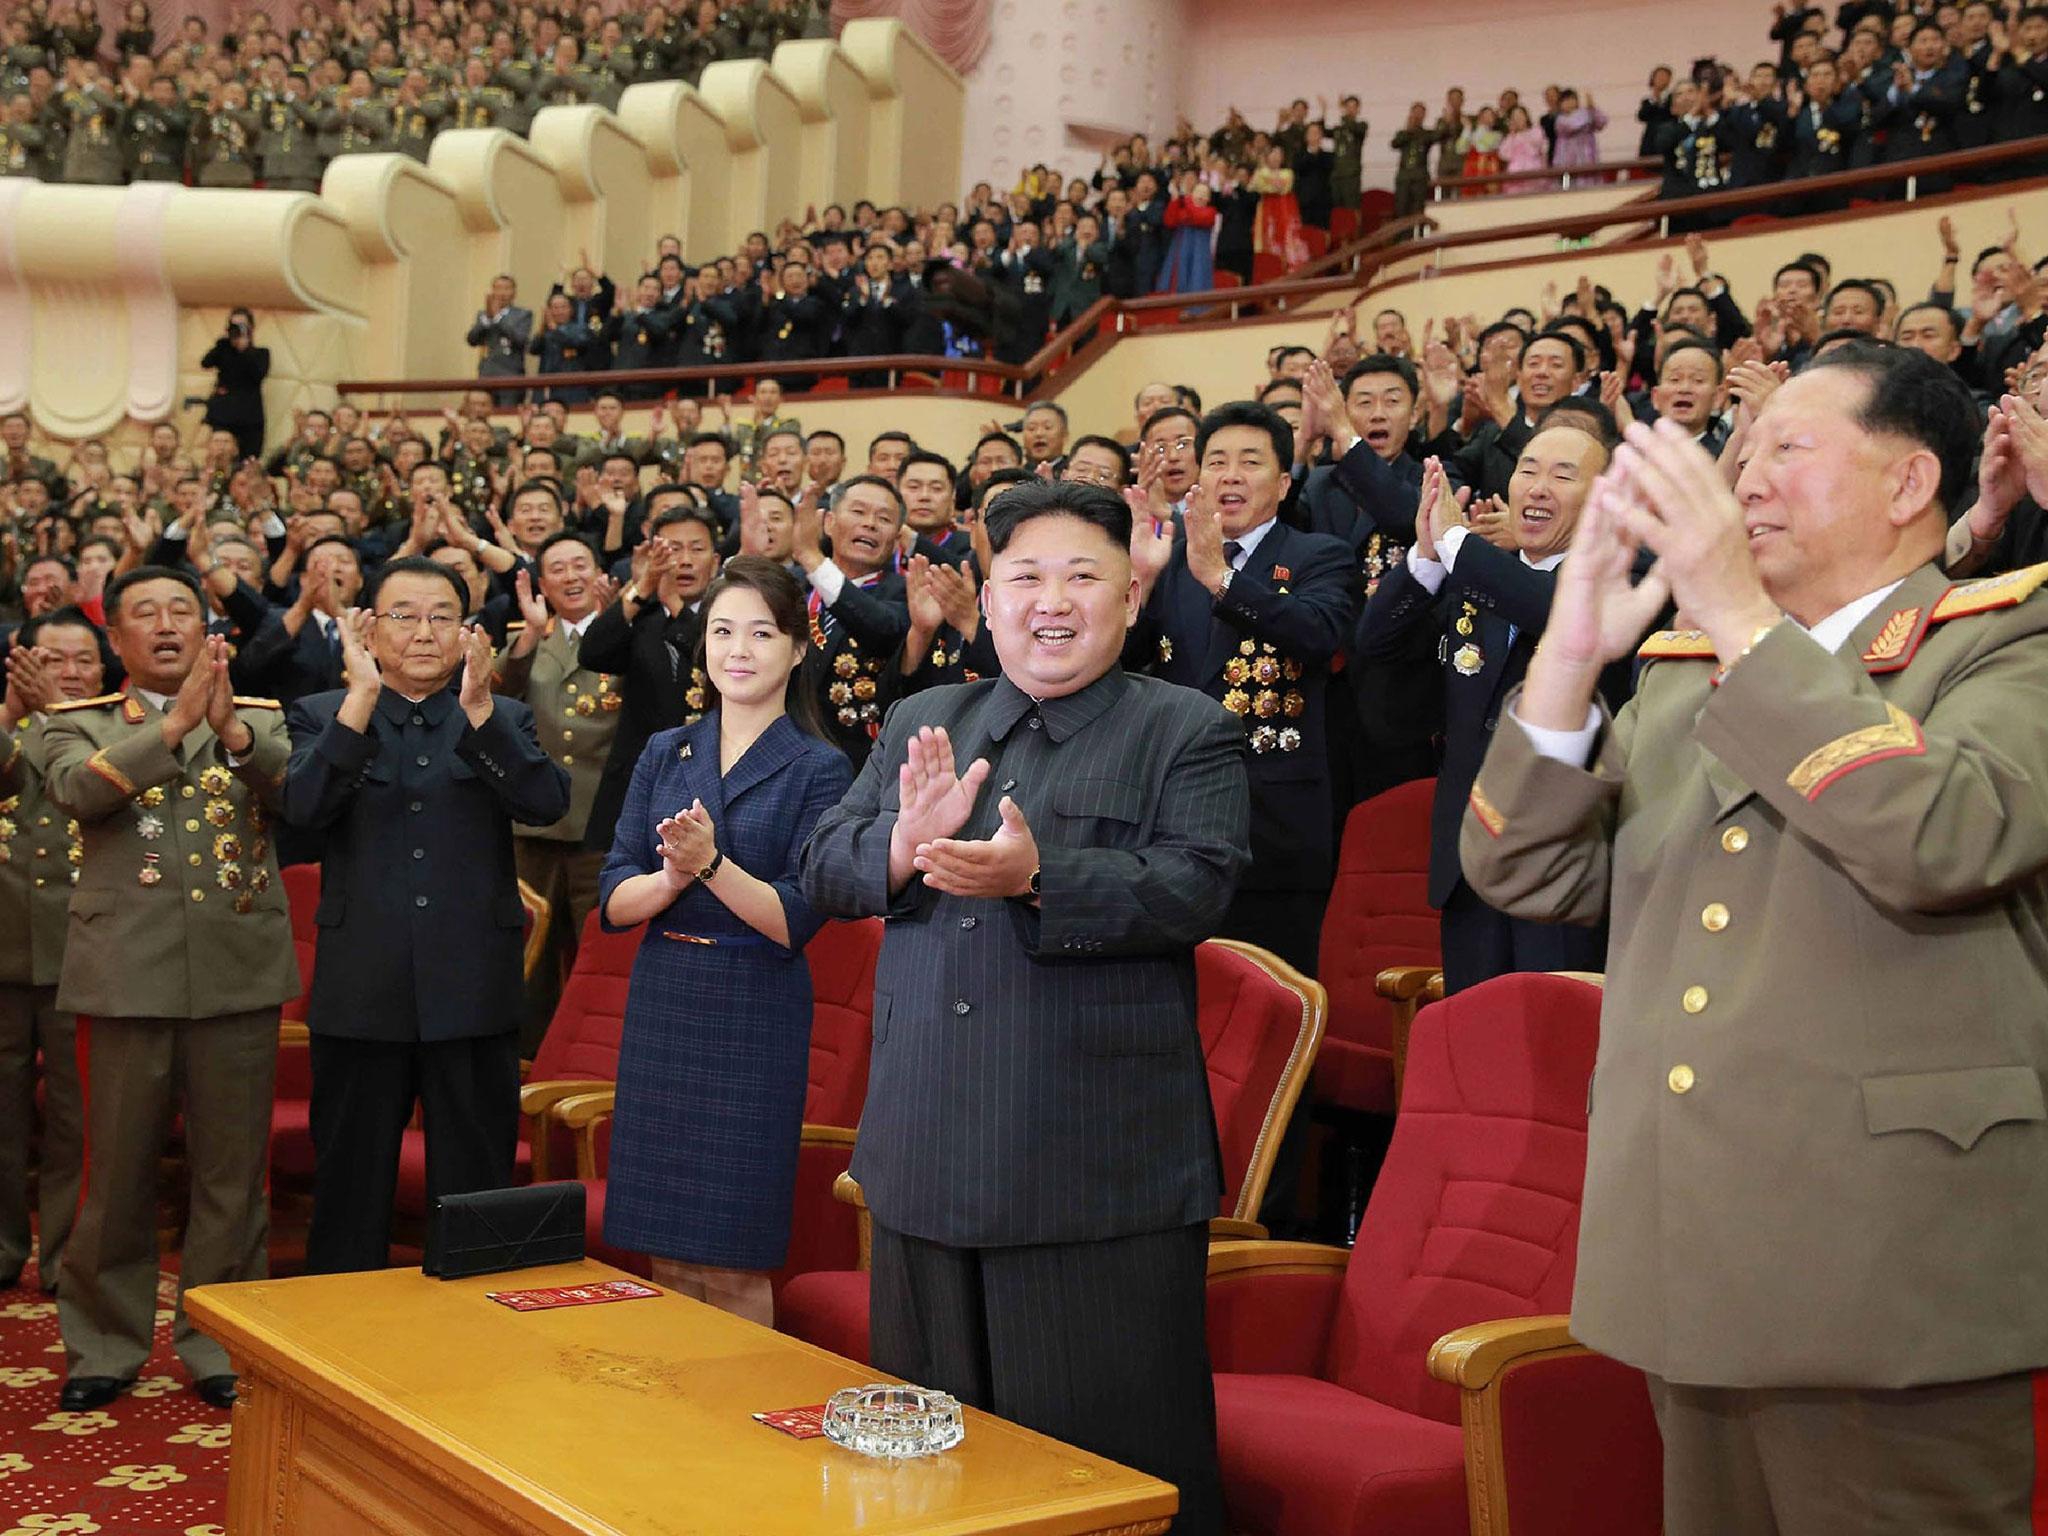 North Korean leader Kim Jong-Un and his wife Ri Sol-Ju attend an art performance dedicated to nuclear scientists and technicians, who worked on a hydrogen bomb which the regime claimed to have successfully tested, at the People's Theatre in Pyongyang